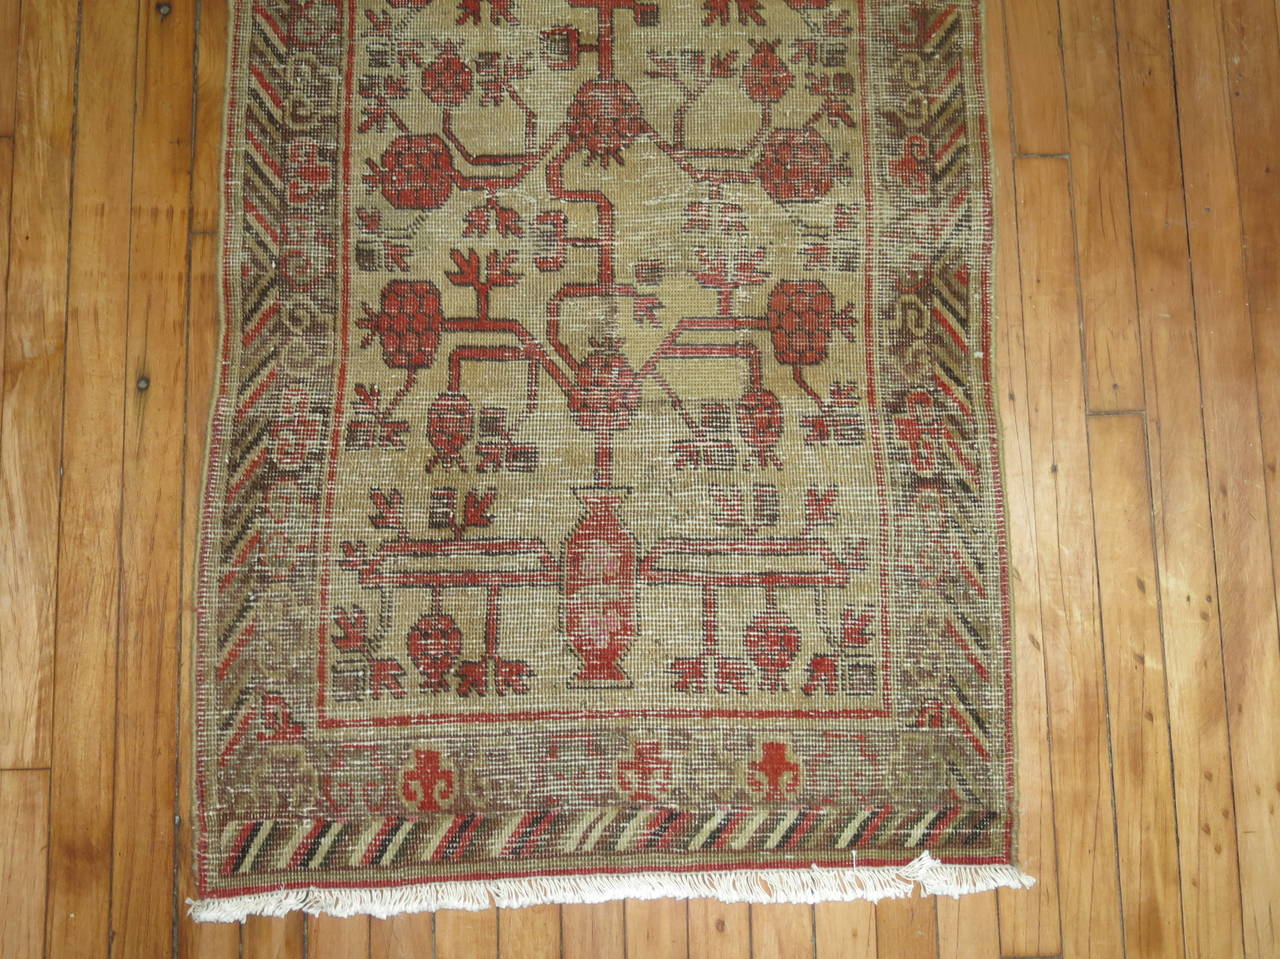 Rare size Classic pomegranate motif scatter size rug.